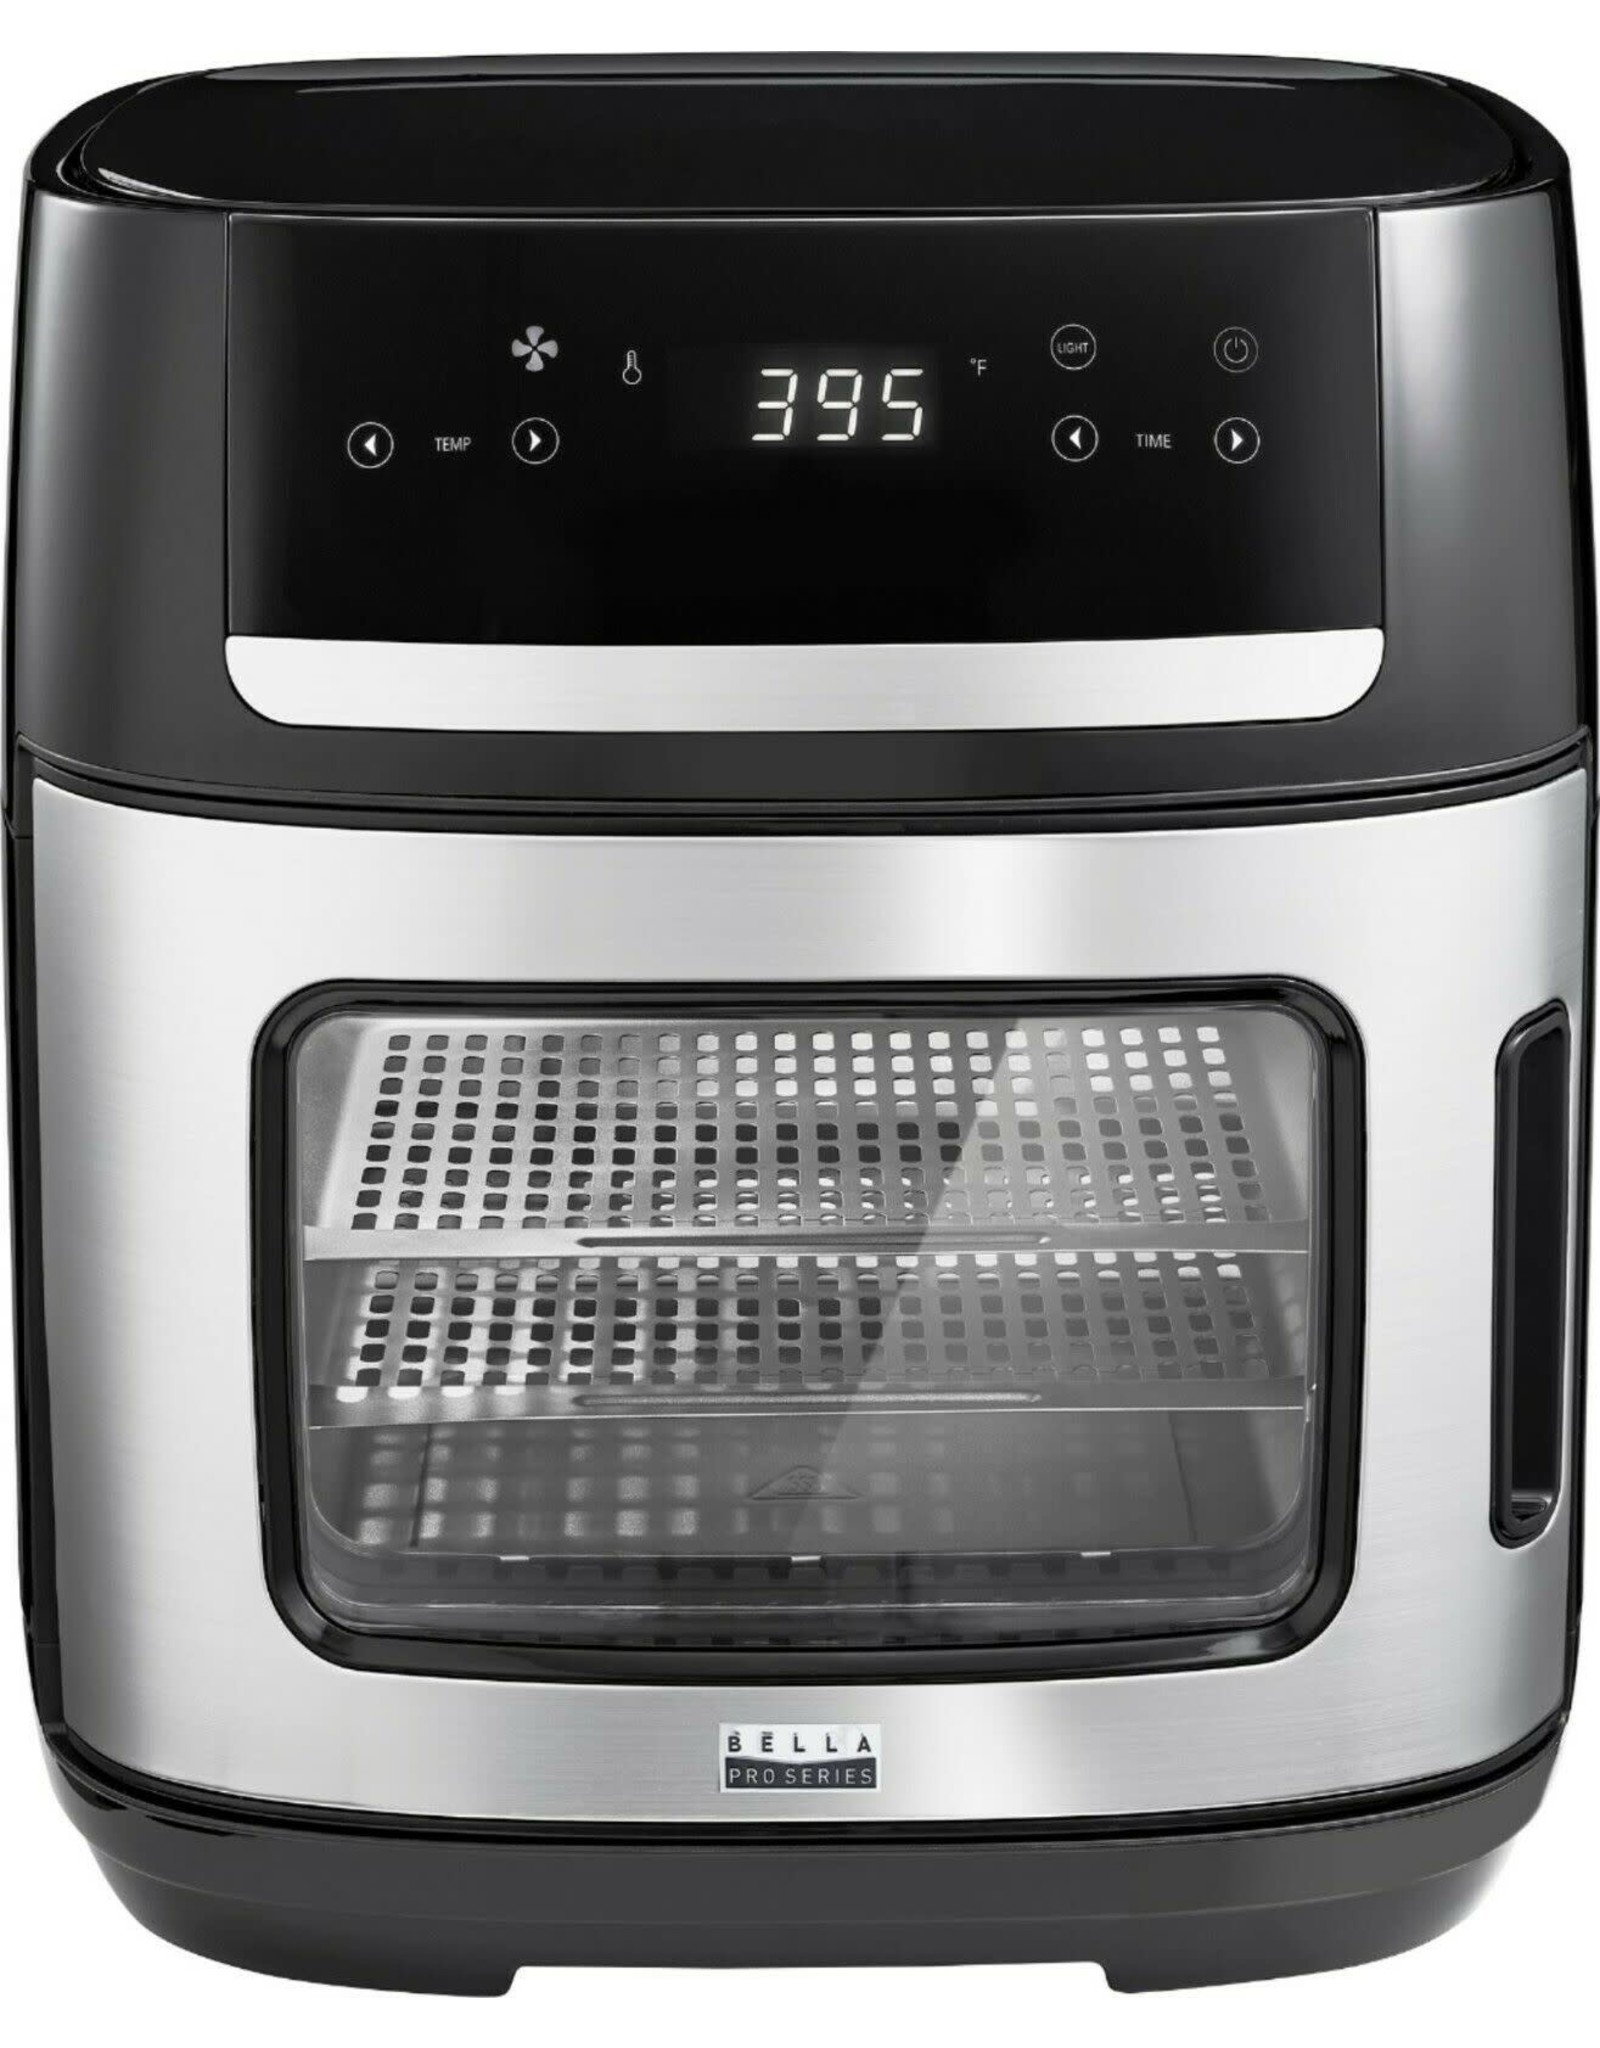 90116 Bella Pro Series - 4-Slice Convection Toaster Oven + Air